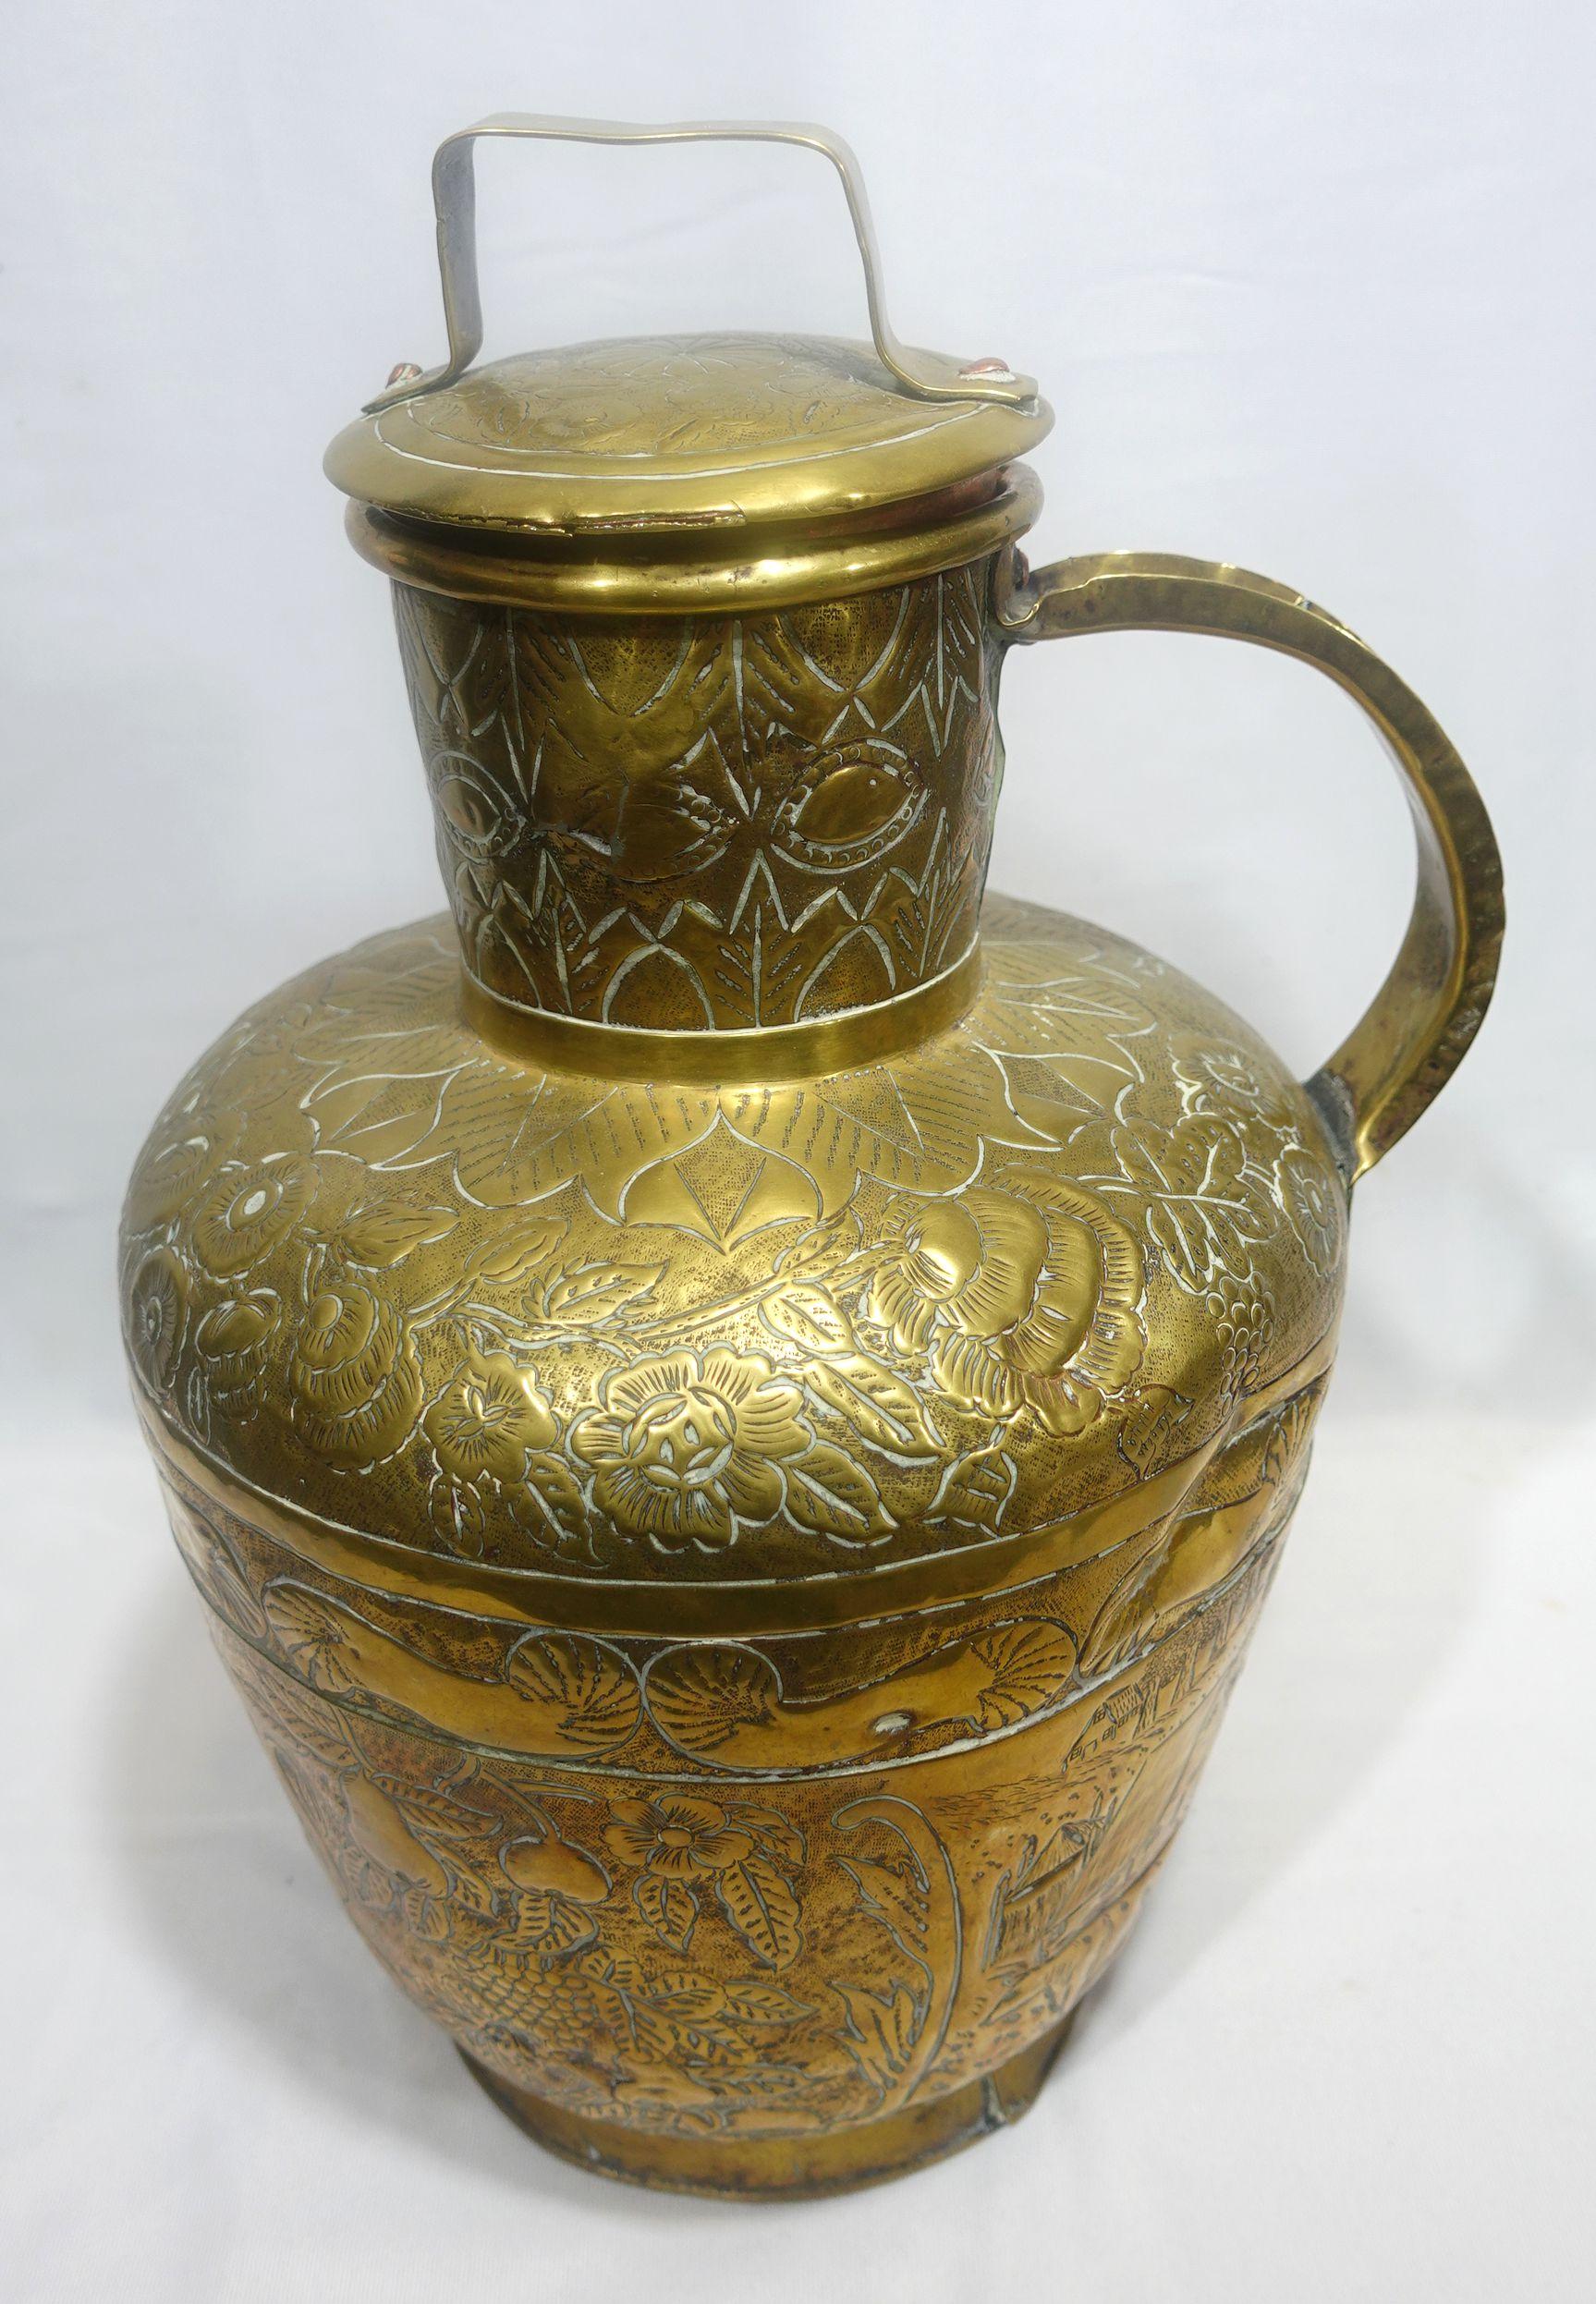 French, Large, and Heavily Embossed Brass Jar with Cover, depicting the fruit tree of pear, leaves, and some other plants on the entire jar, very delicate and excellent workmanship.

